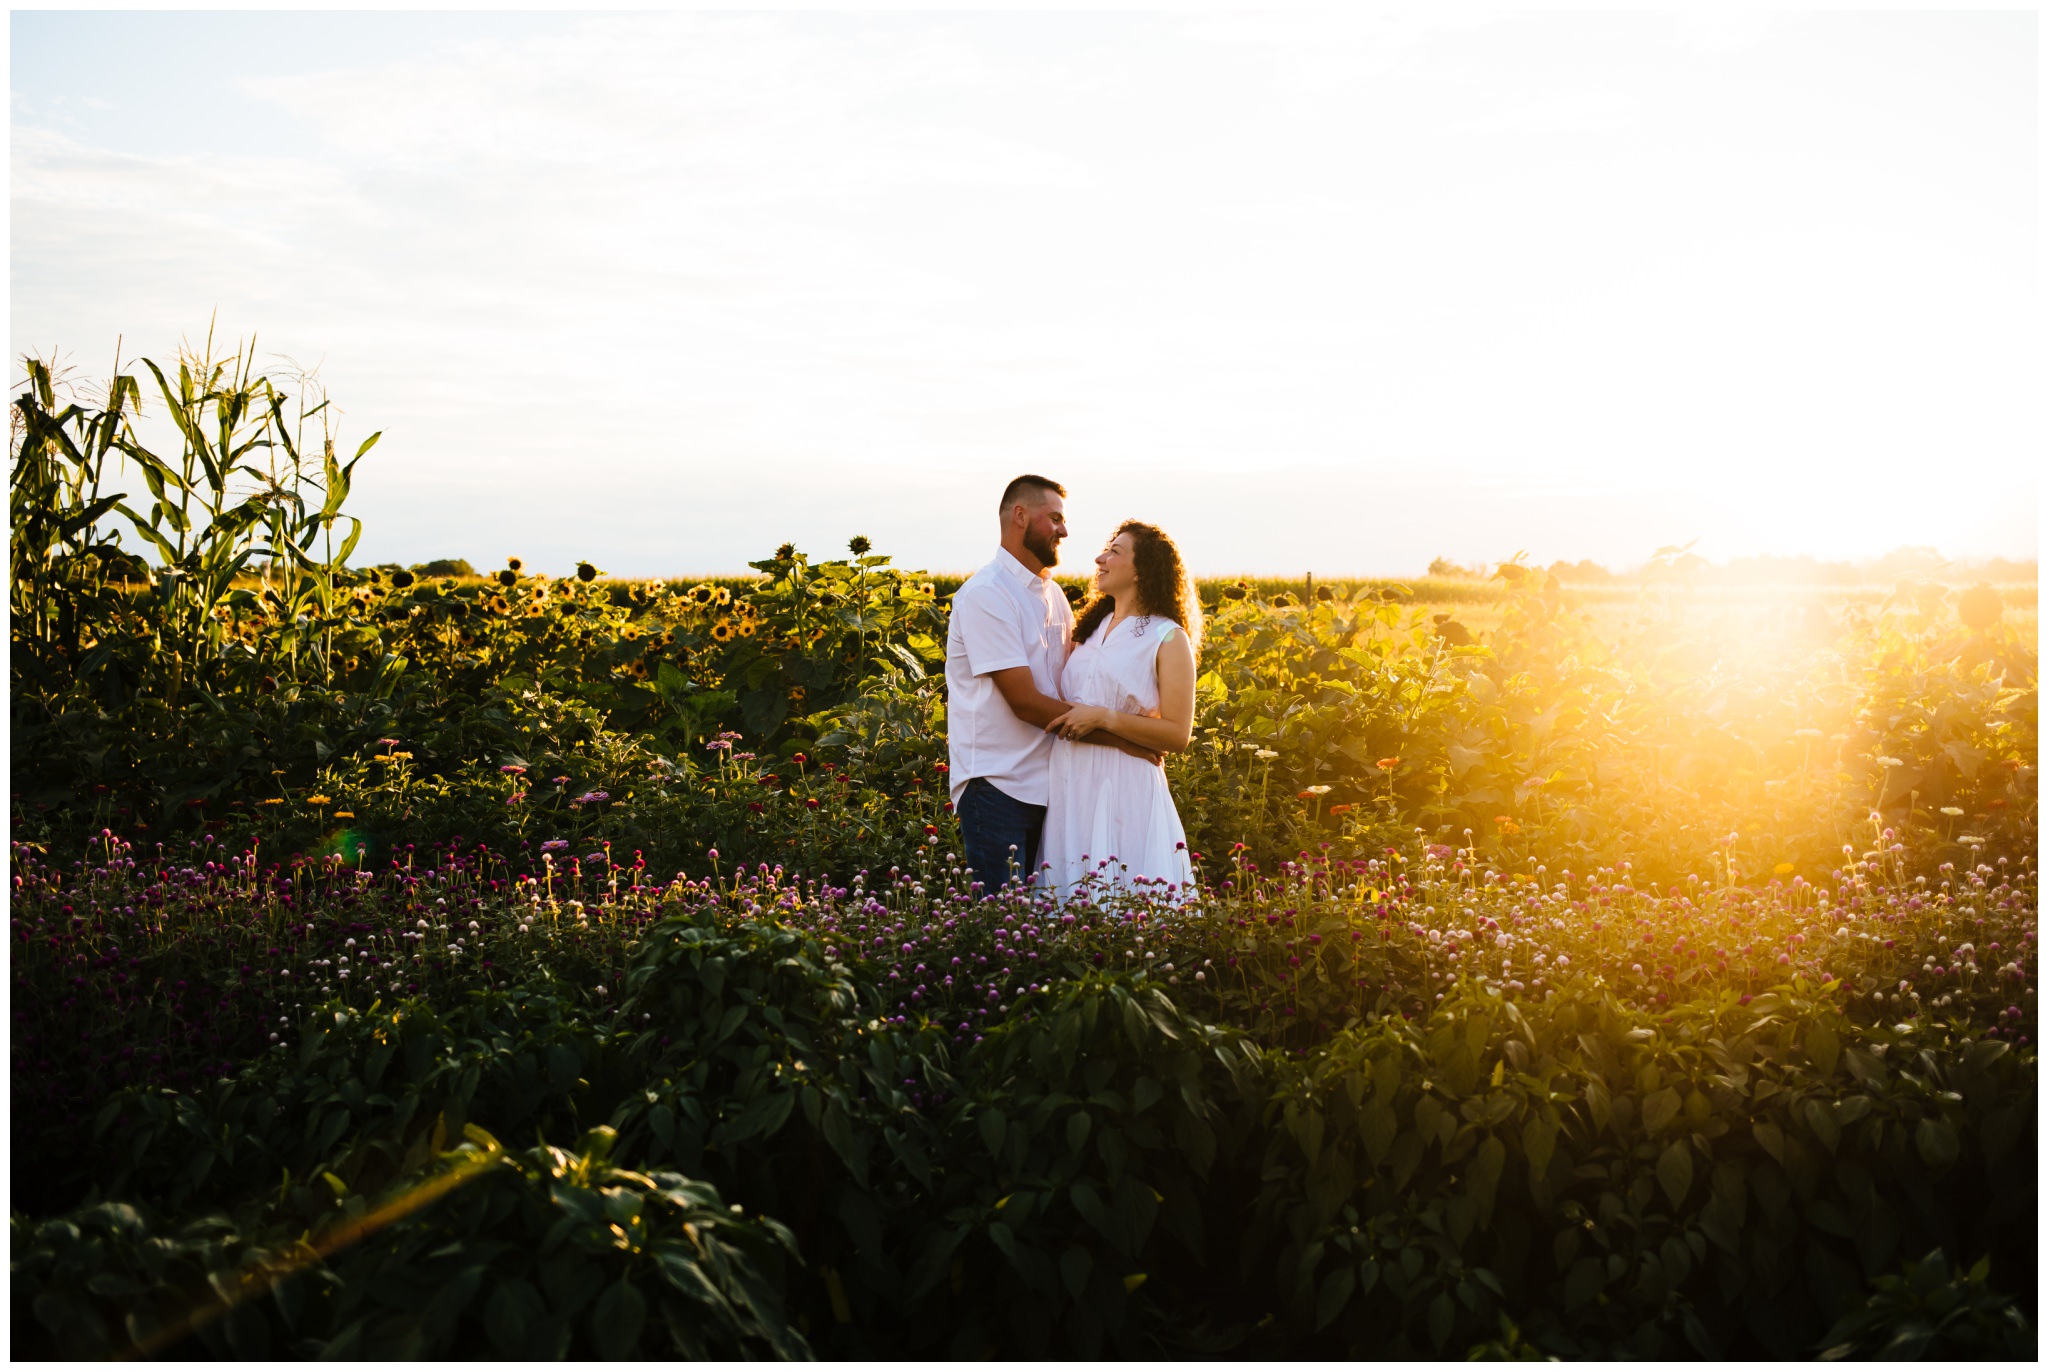 A couple gazes at each other in a field of wildflowers during their summer engagement session on a farm.